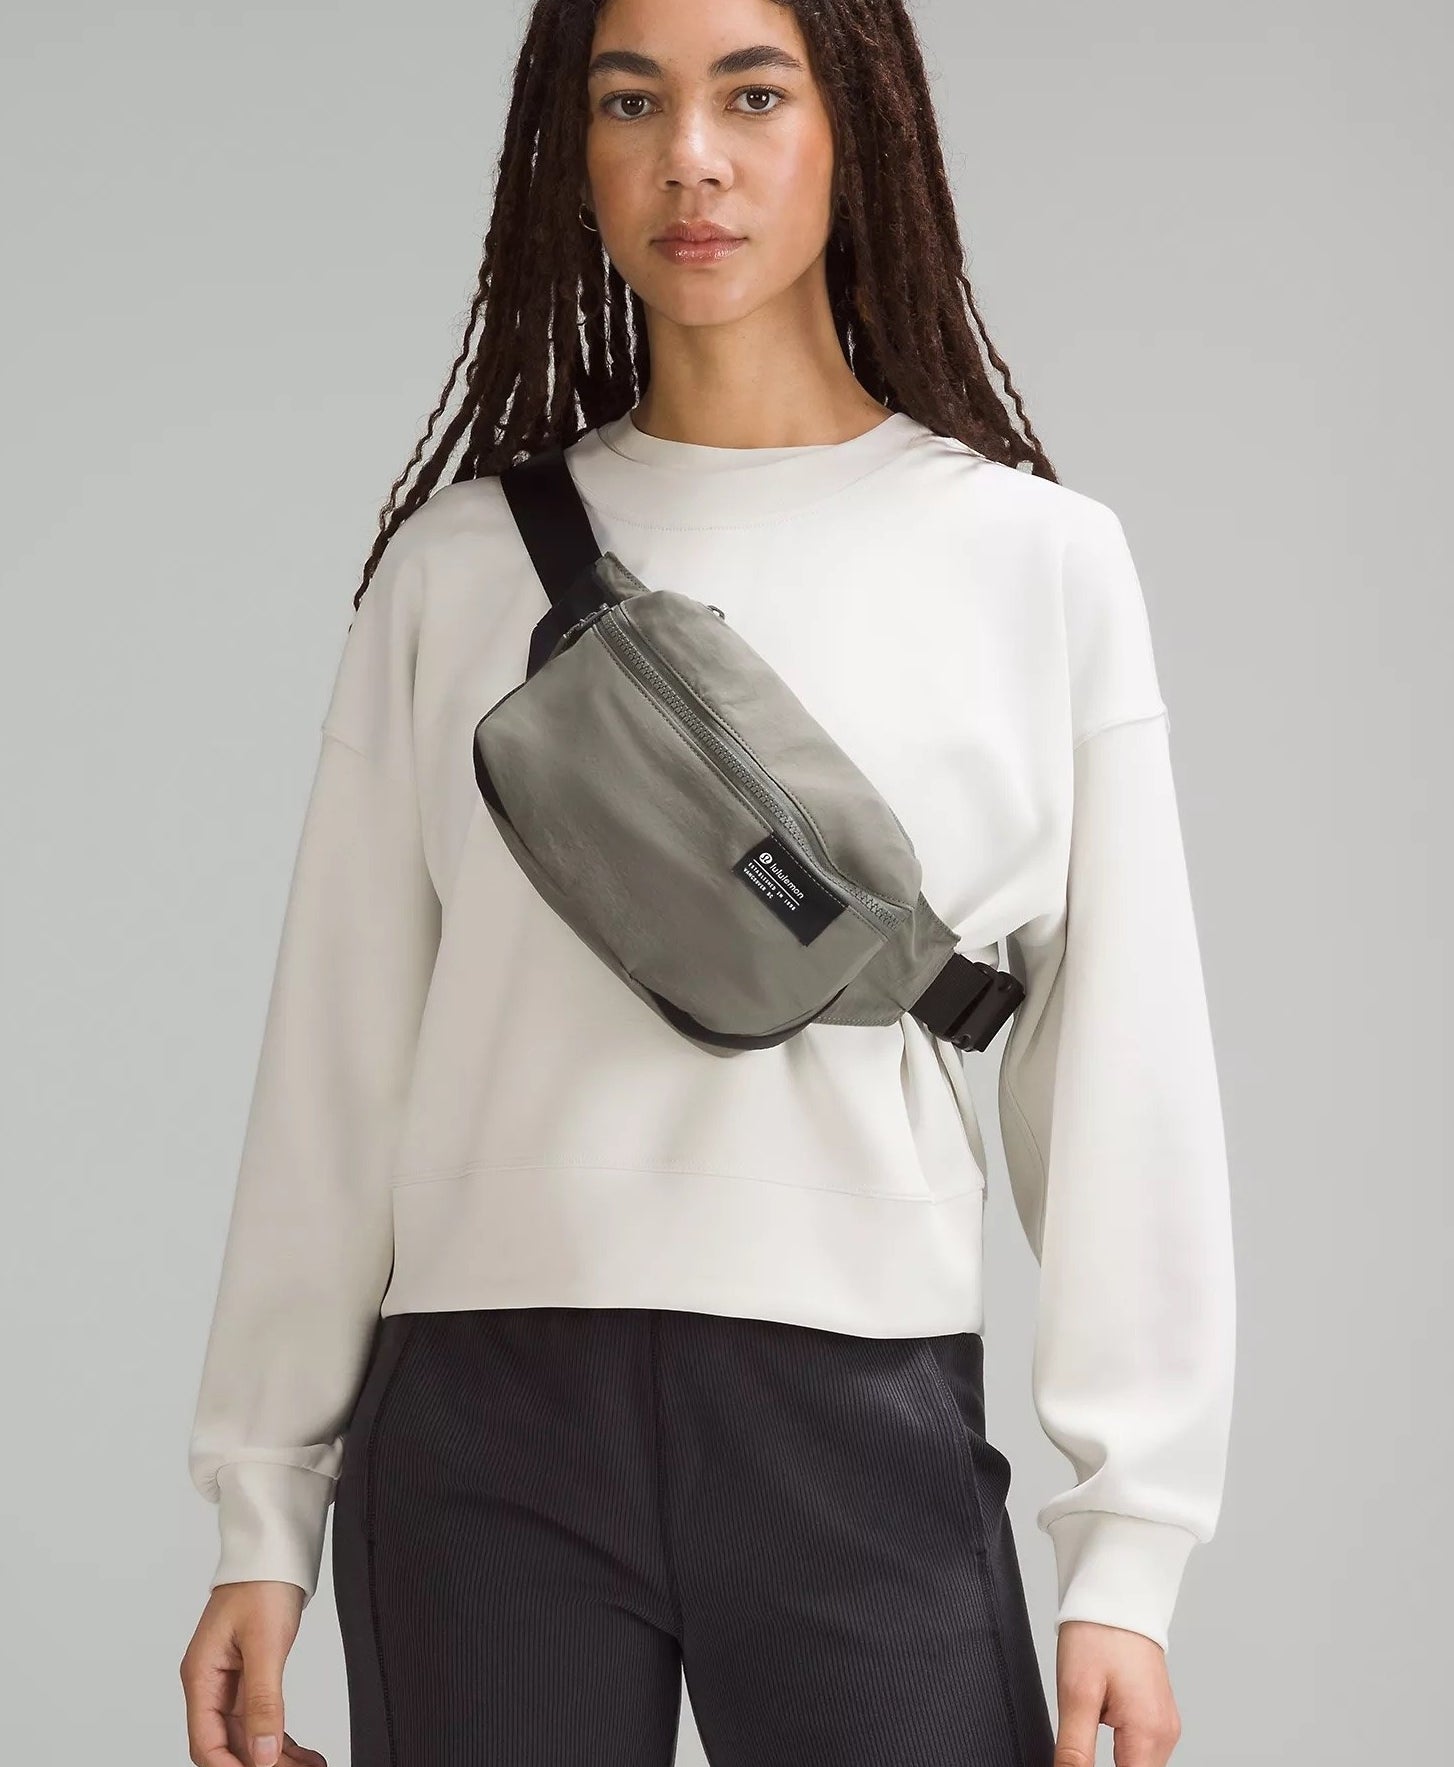 a model wearing the belt bag over a sweater in front of a plain background